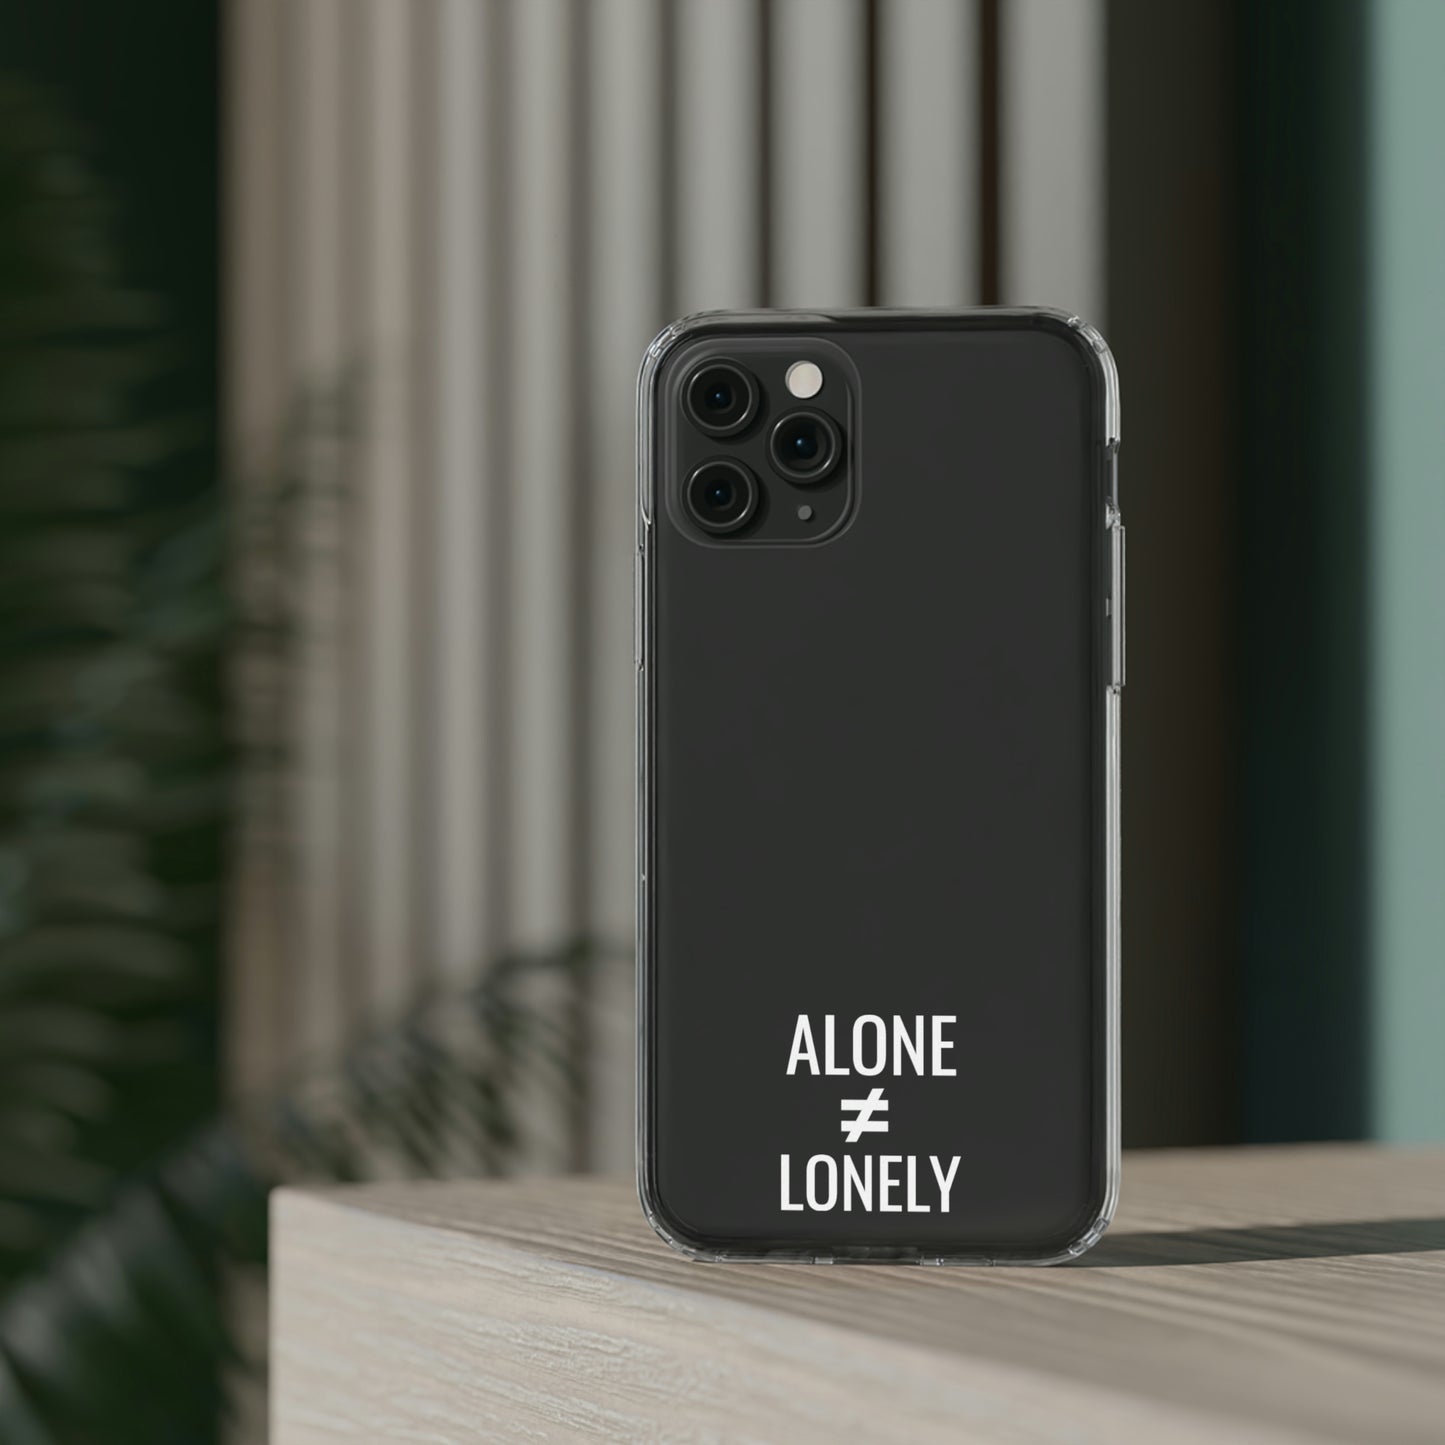 Alone ≠ Lonely Clear Phone Cases